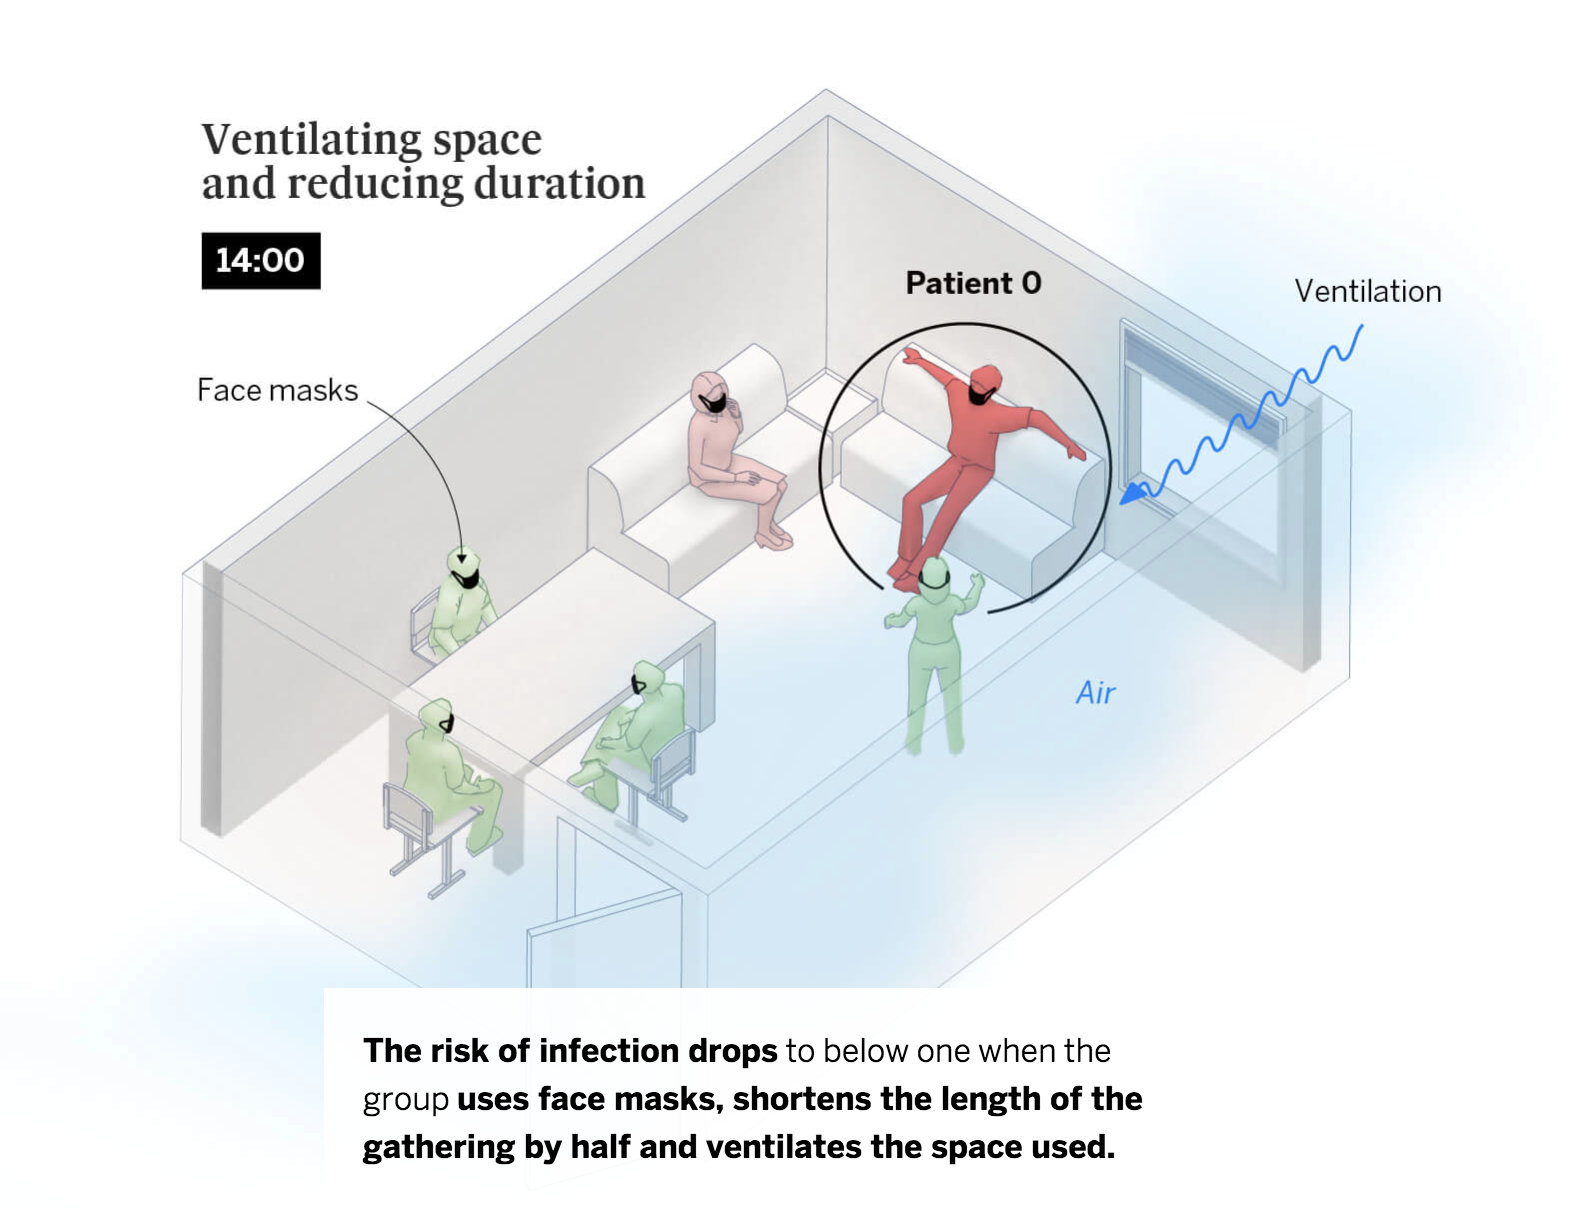 A screenshot from A room, a bar and a classroom: how the coronavirus is spread through the air, showing a drawing of 6 masked people in a room